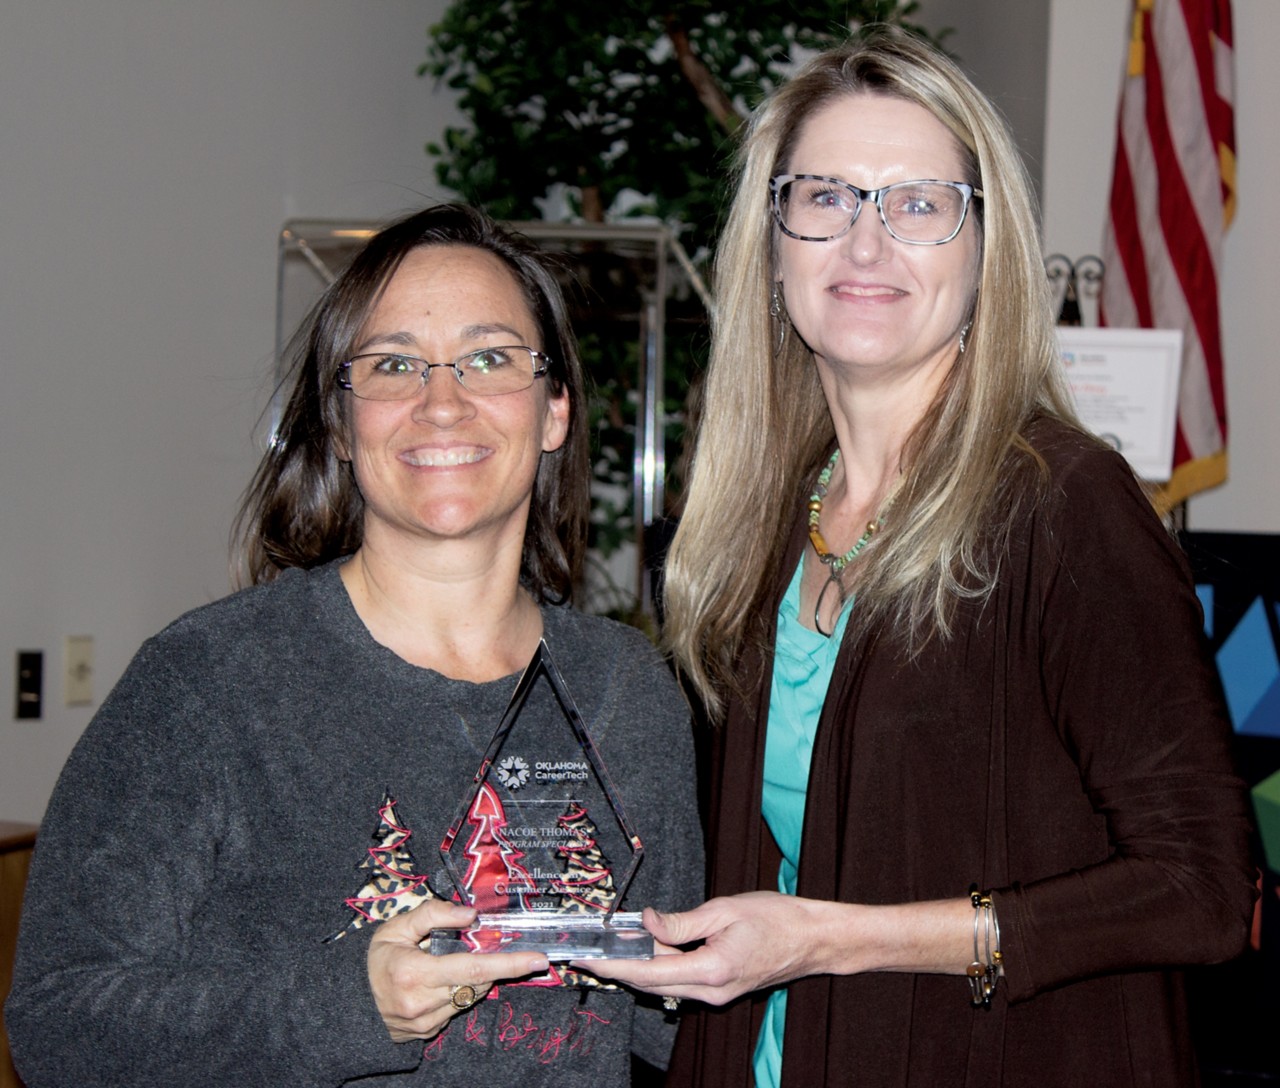 Nacoe Thomas, left, received an Excellence in Customer Service Pinnacle Award. With her is Oklahoma CareerTech State Director Marcie Mack.